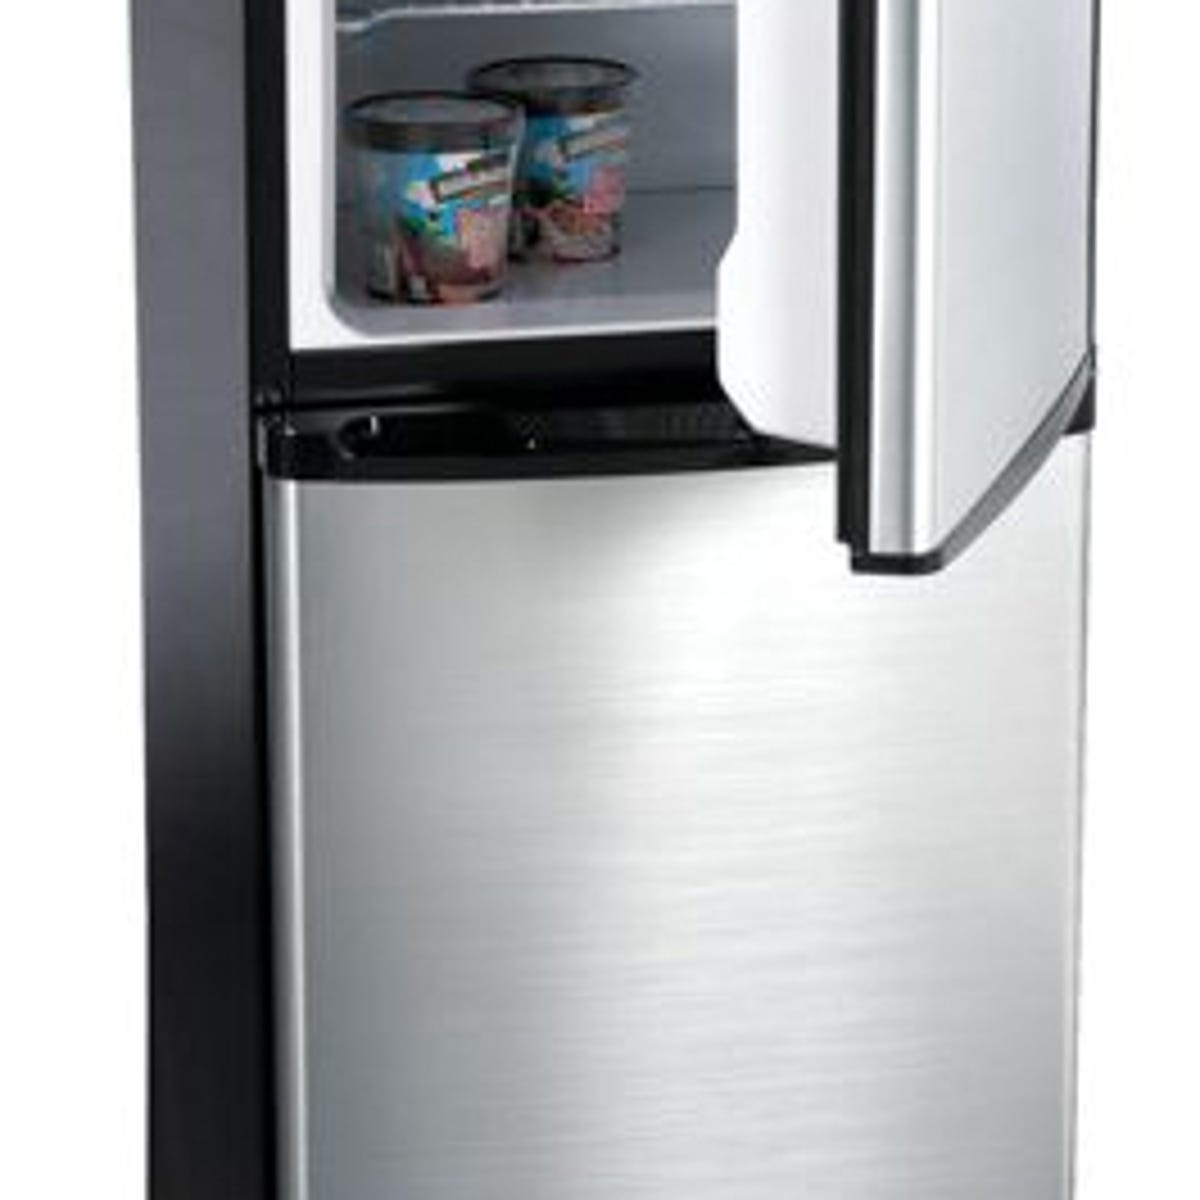 Little fridge, big (and cold) feature - CNET